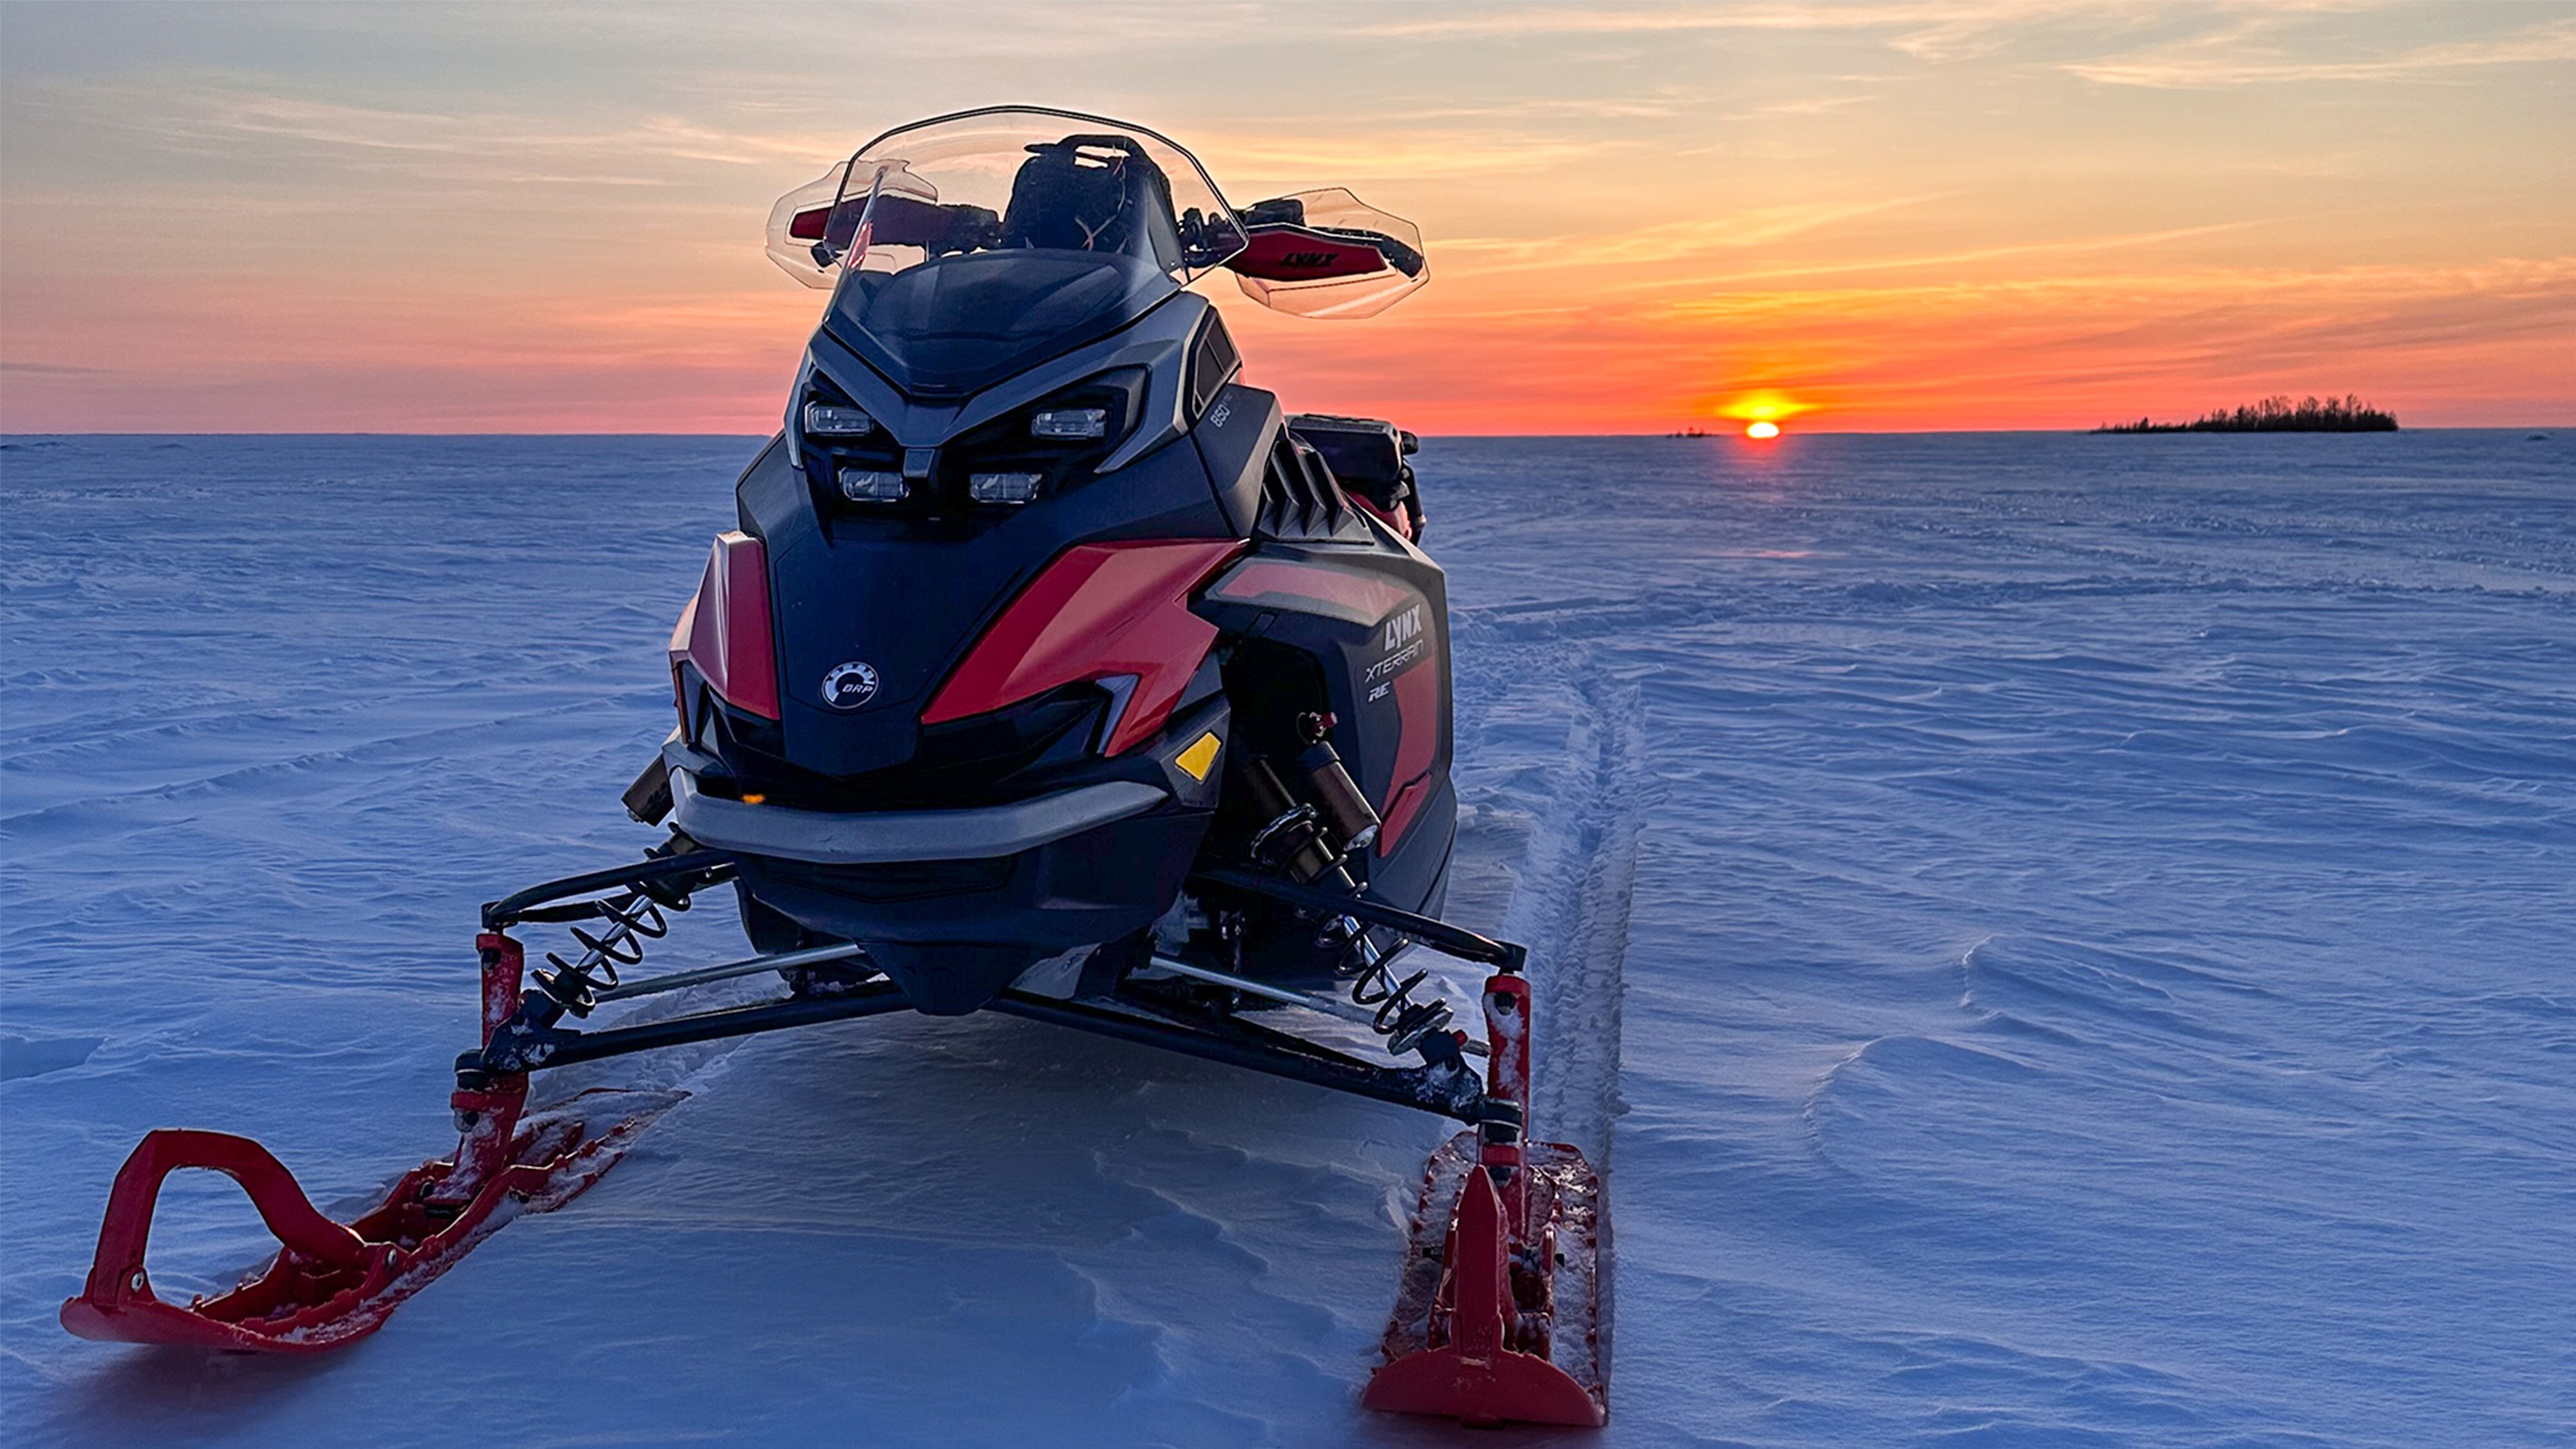 Lynx Xterrain RE 850 E-TEC crossover snowmobile parked on a frozen lake at sunset